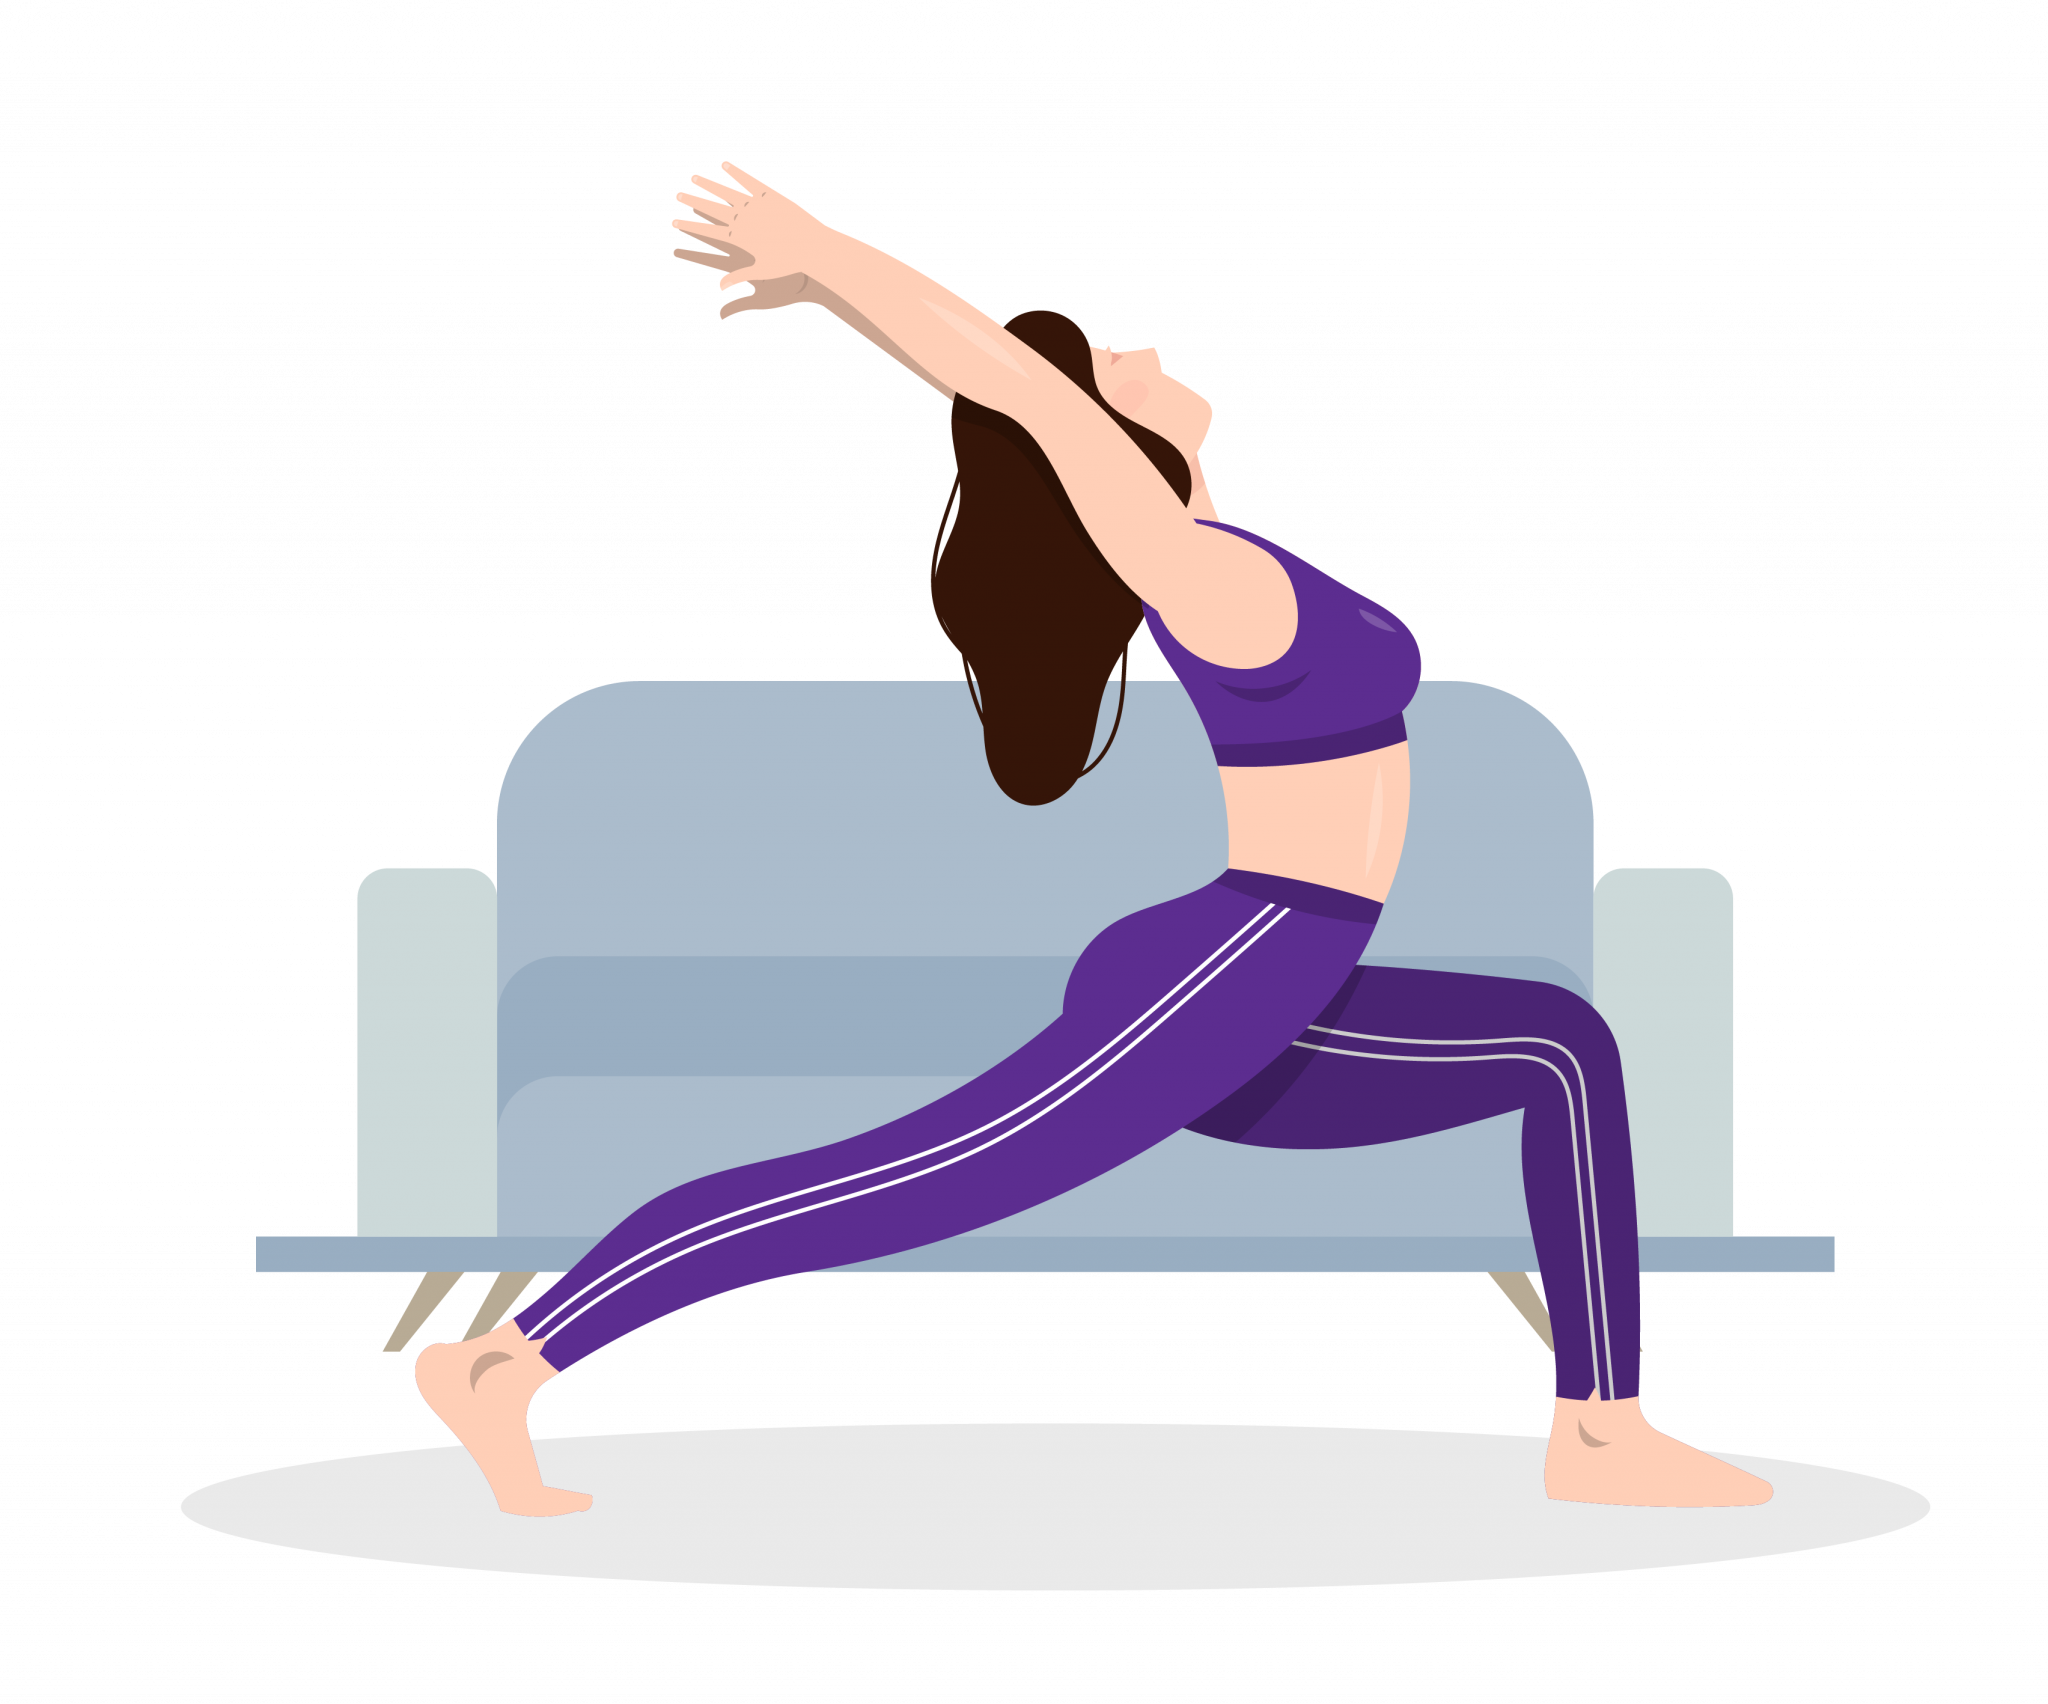 Downward Facing Dog Pose Exercises to Increase Height - Growthon